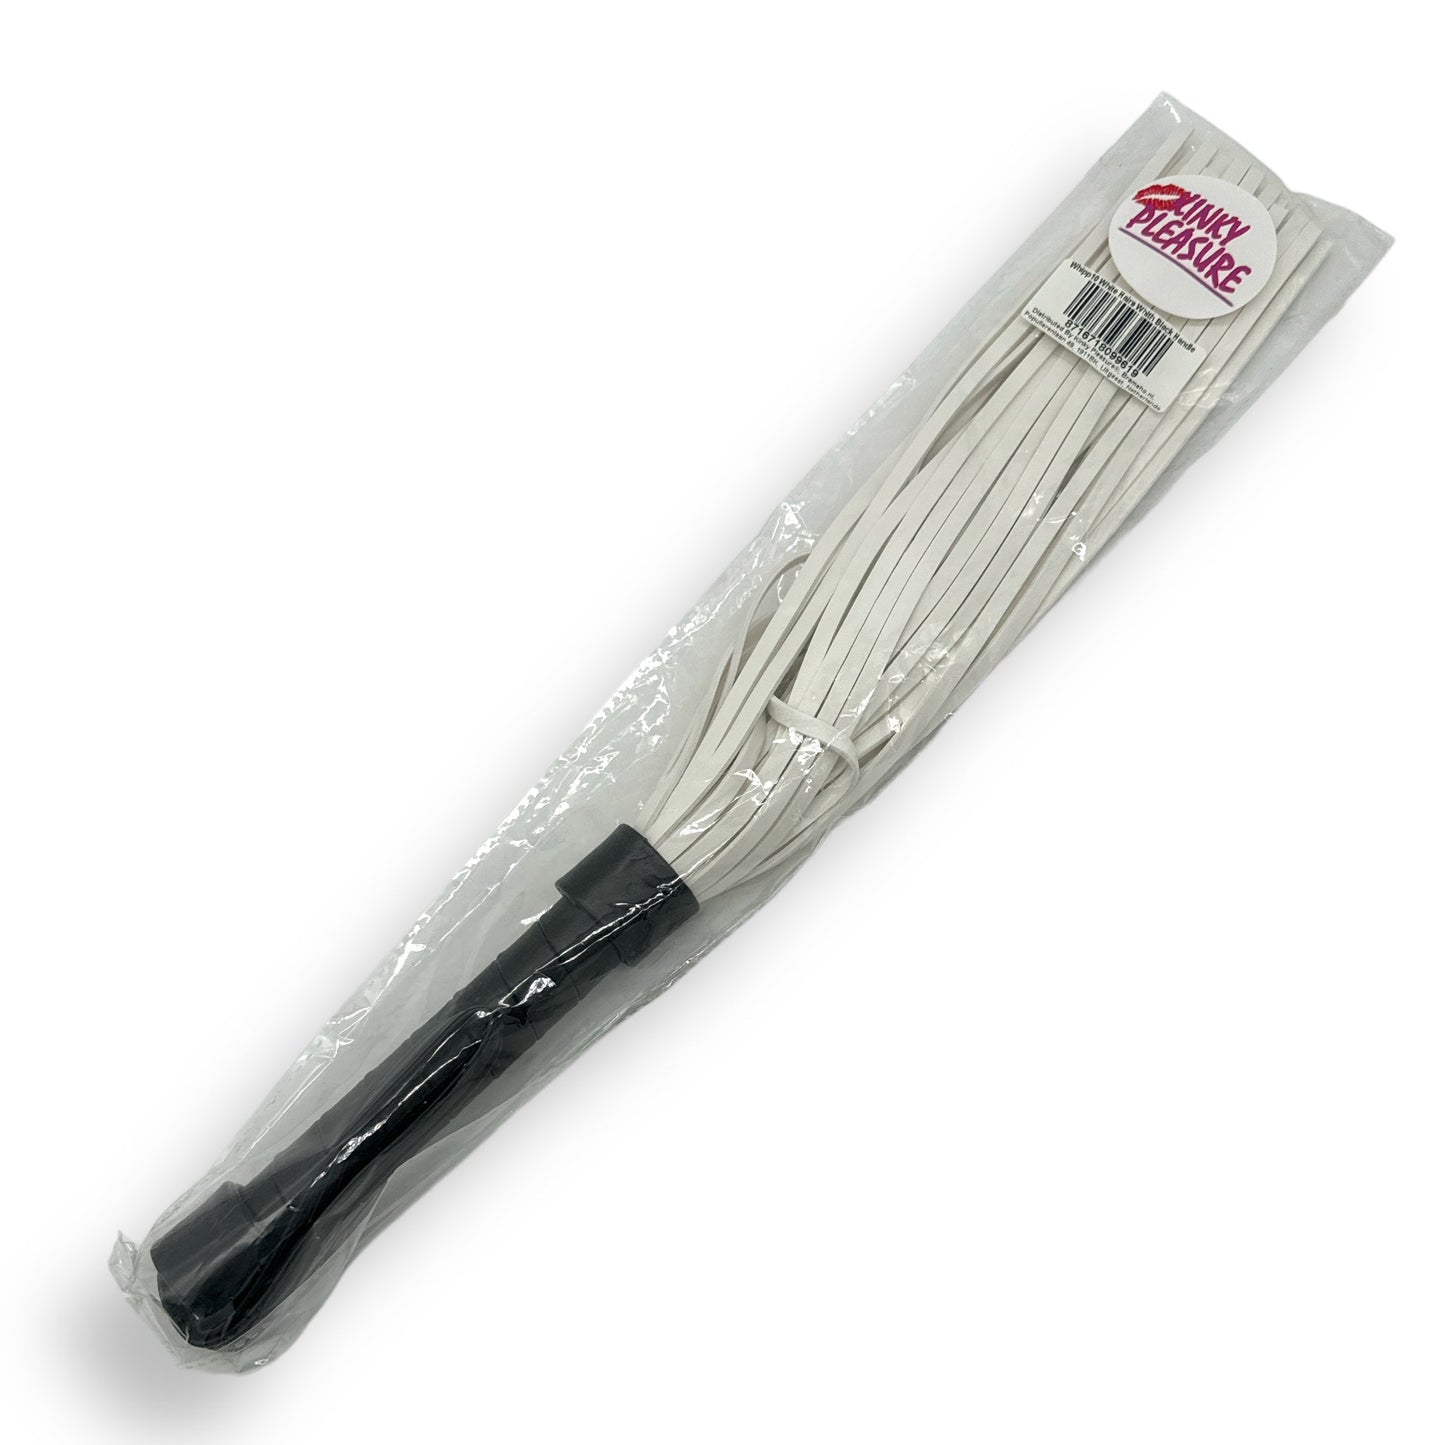 Stylish Whip with White Hairs - 44cm